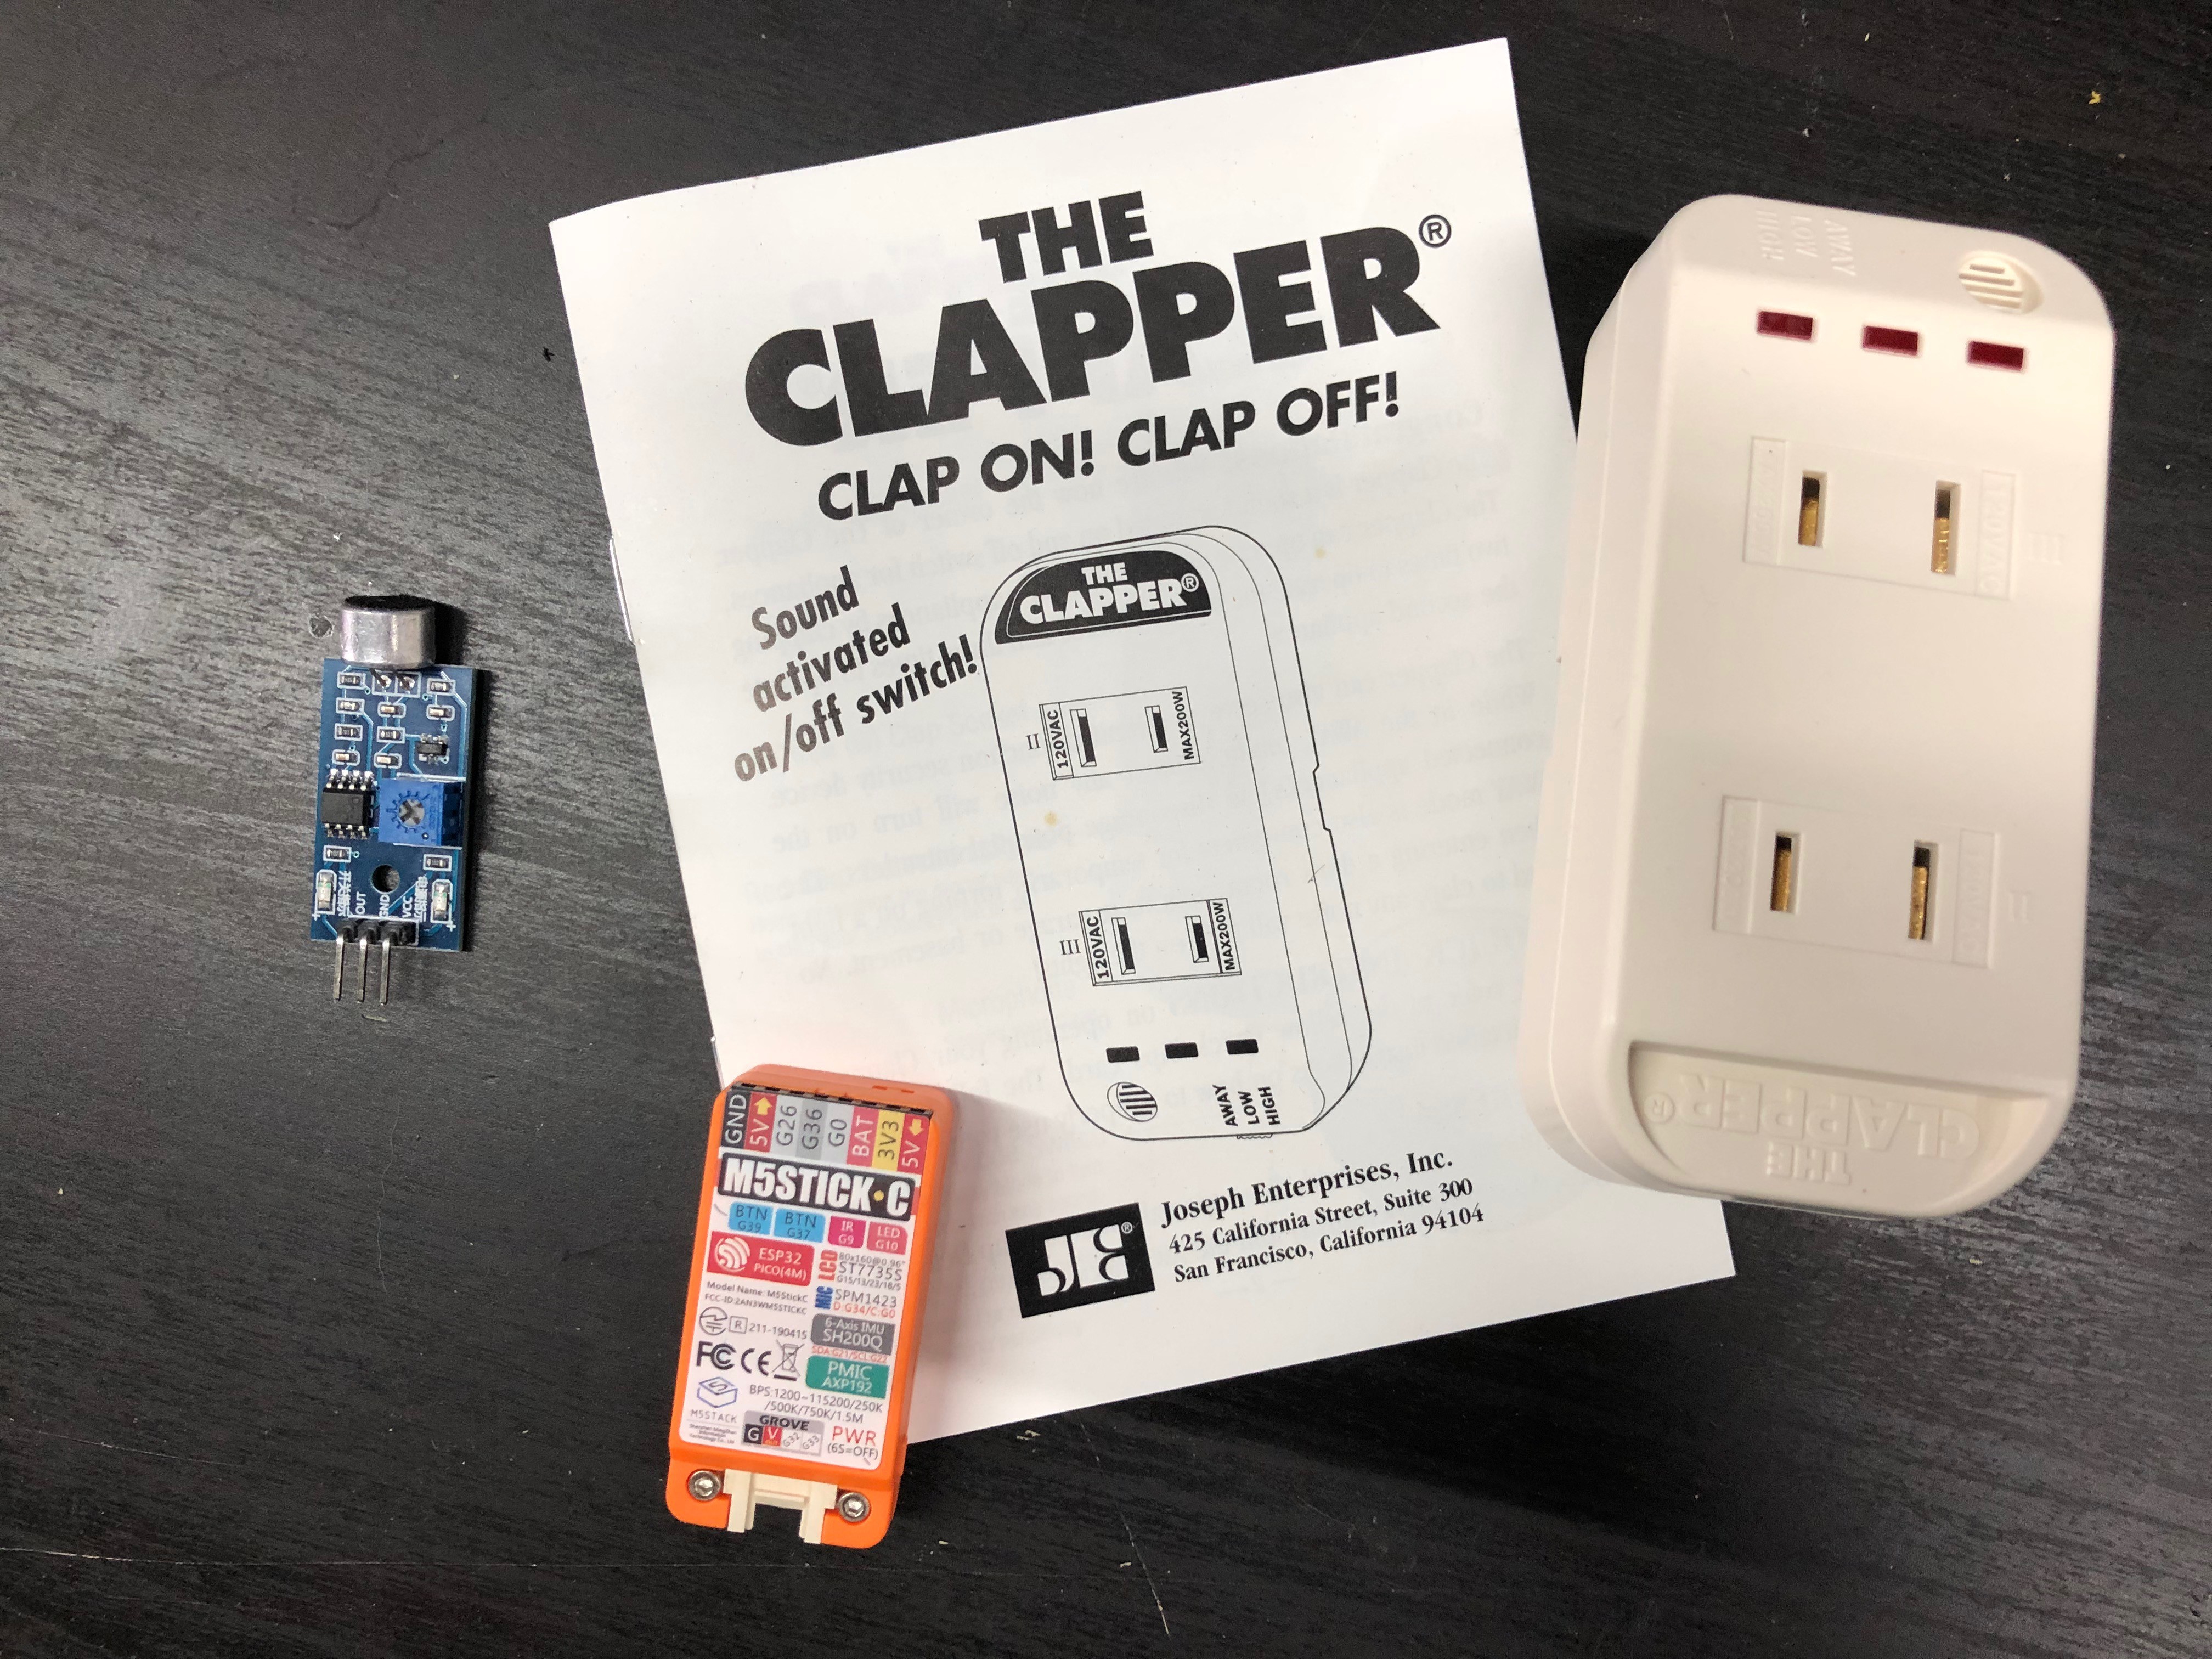 The Clapper: Does It Work?